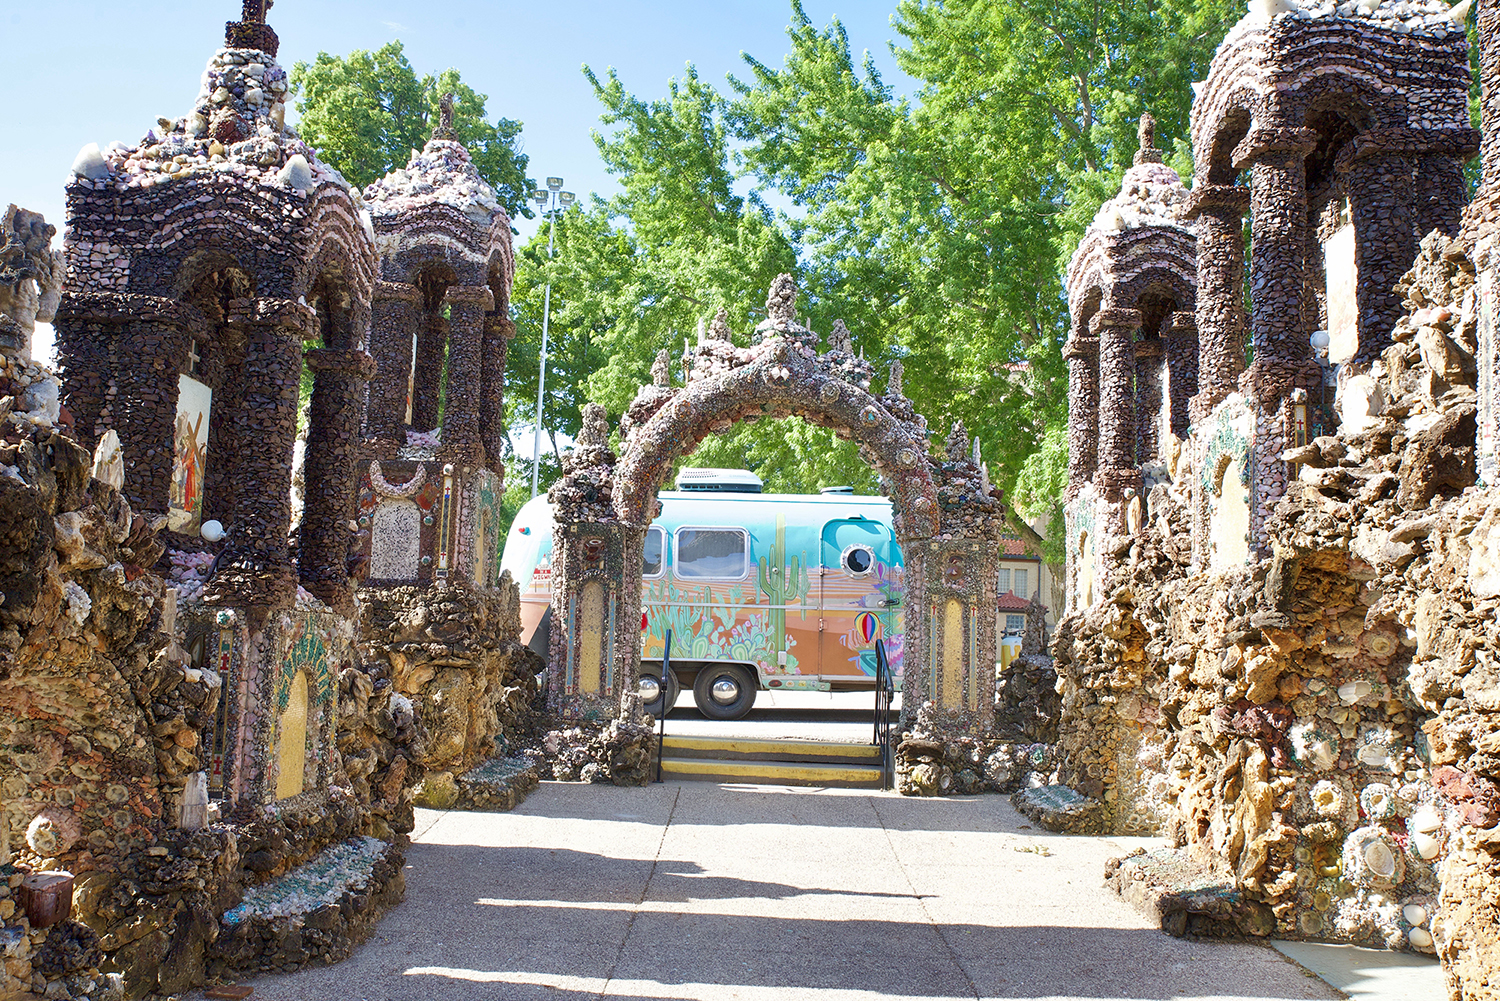 Colorful Airstream trailer as viewed through a grotto arch from within grotto.